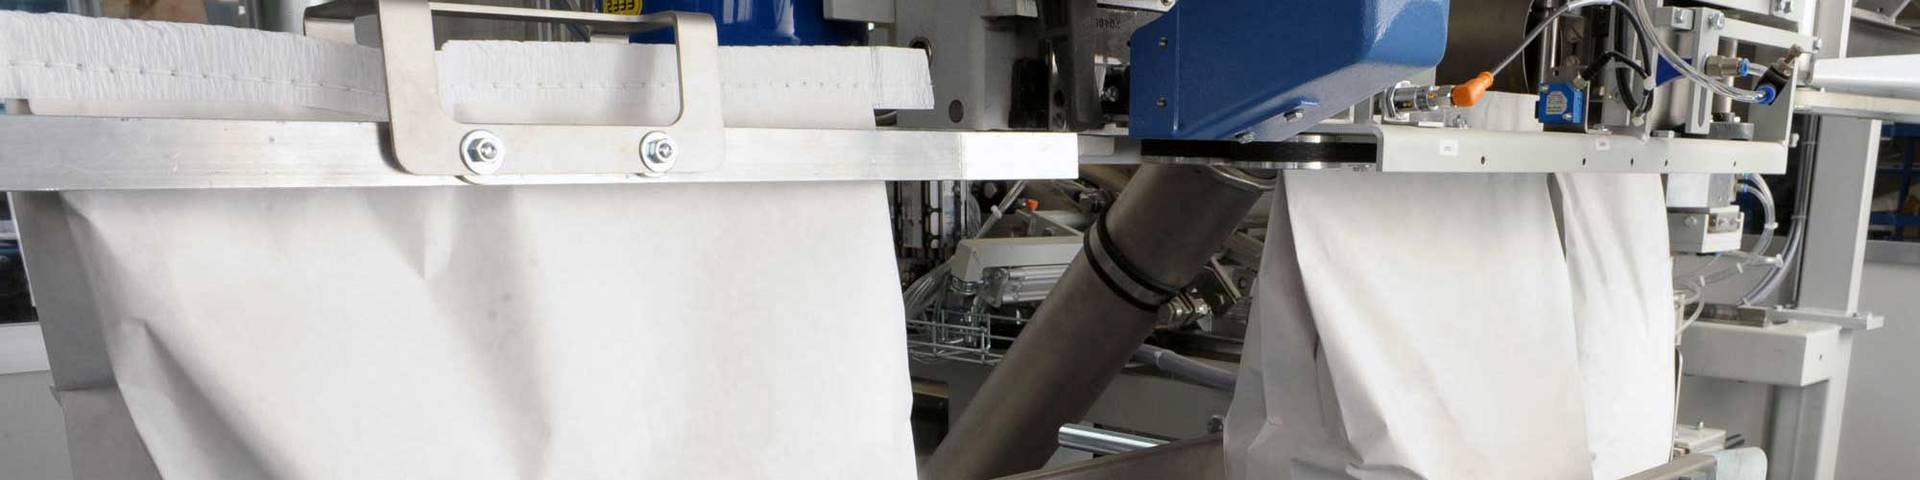 packaging machine for bagging of granular products in single dose